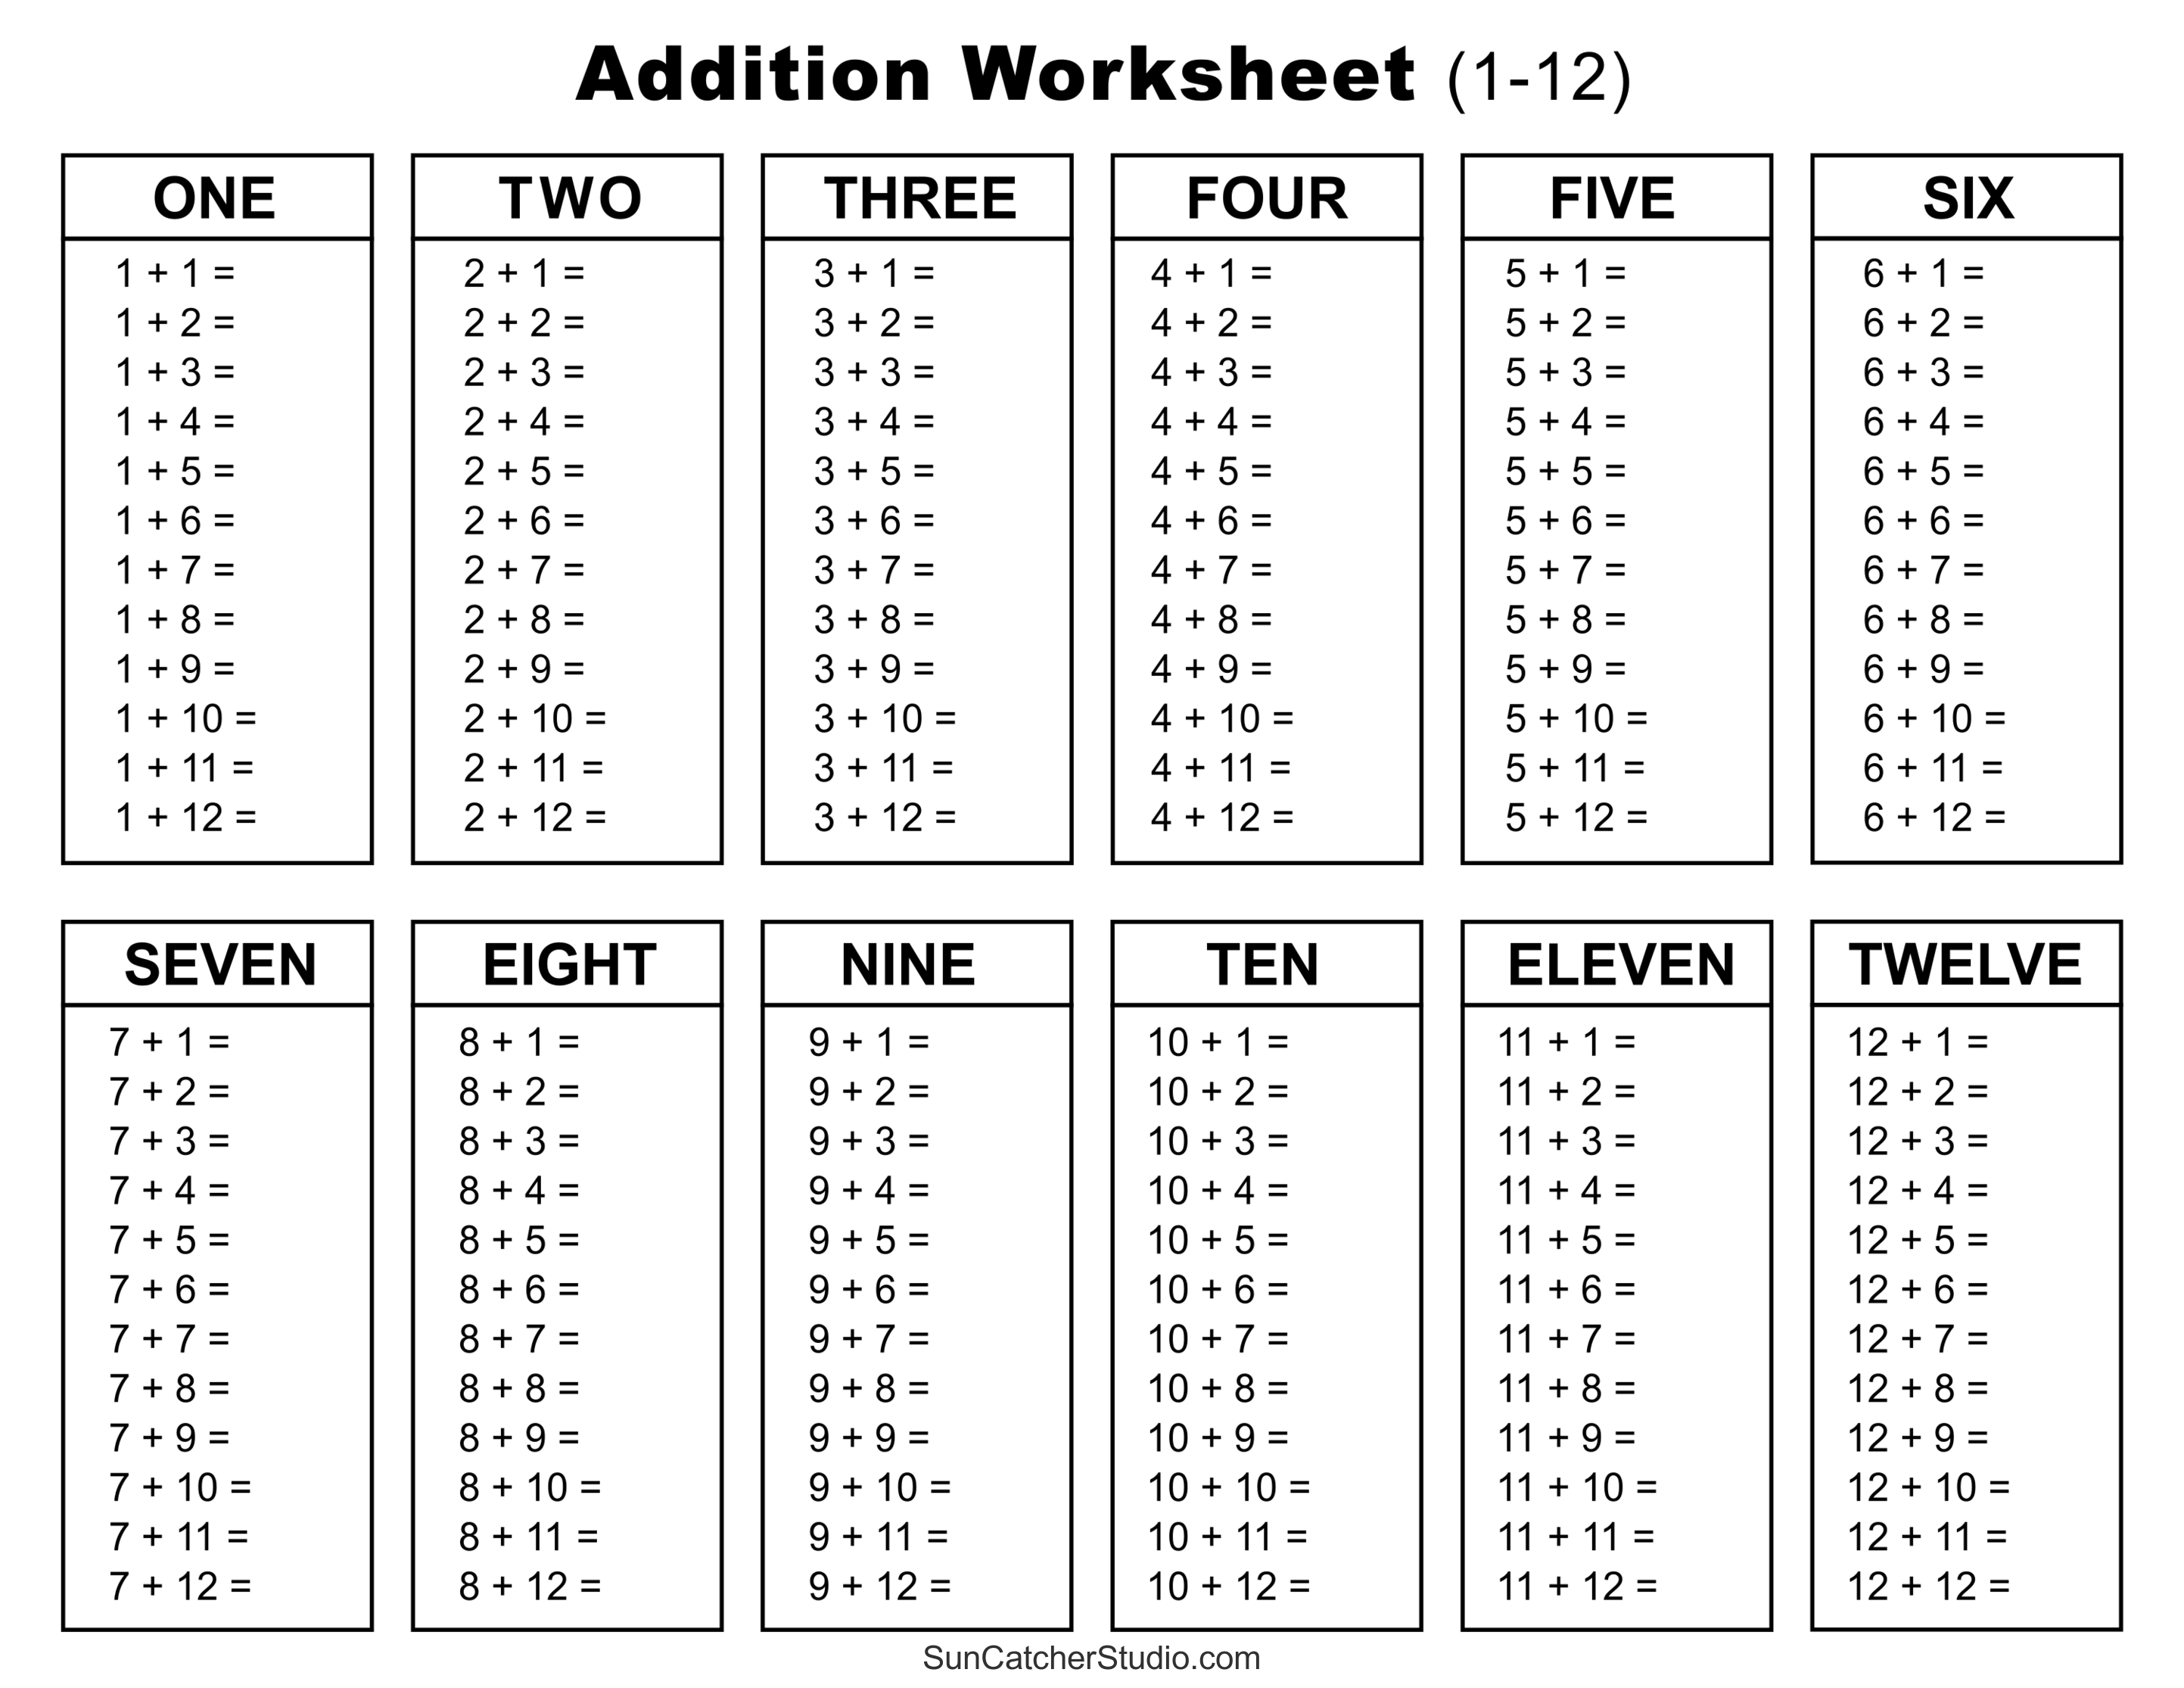 addition-charts-tables-worksheets-free-printable-pdf-files-diy-projects-patterns